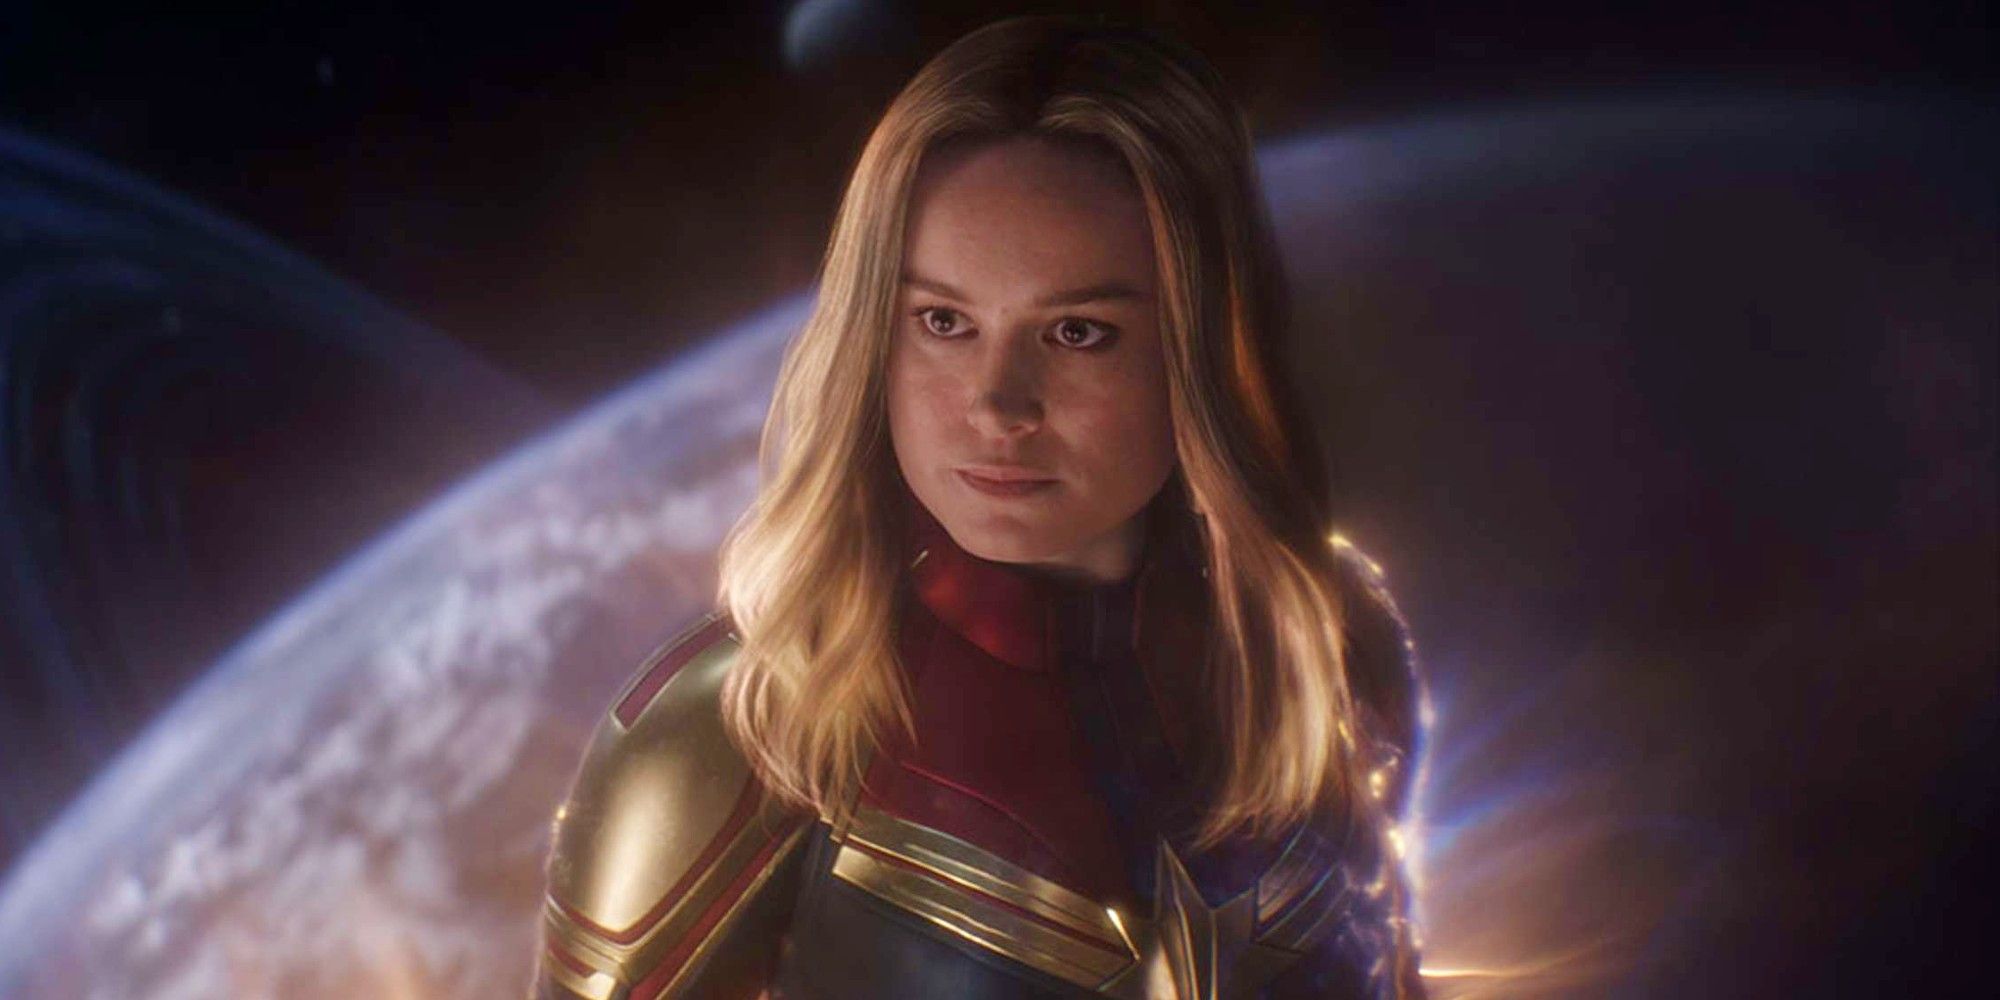 Brie Larson as Captain Marvel in outer space